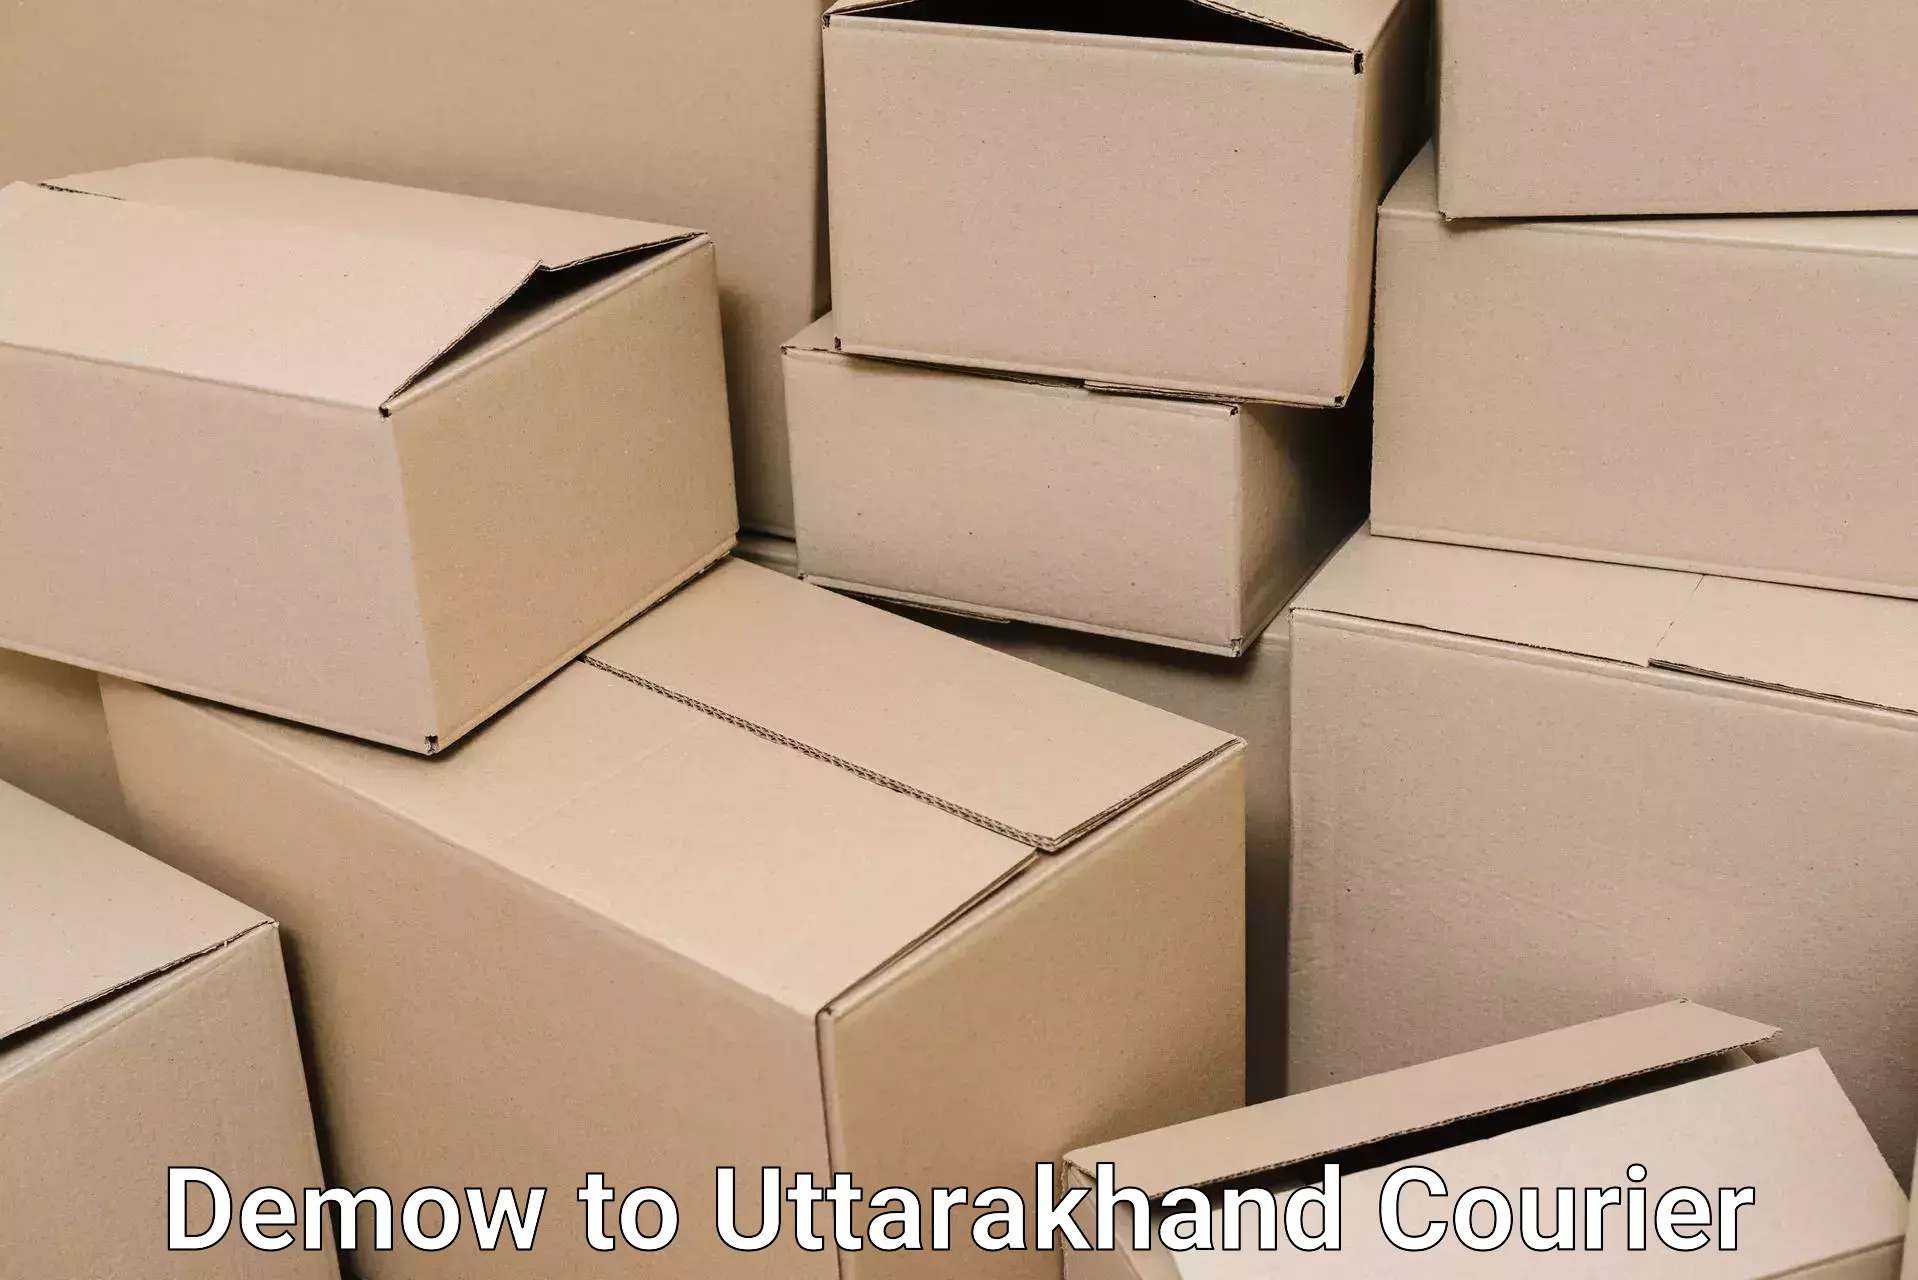 Dependable household movers Demow to Uttarakhand